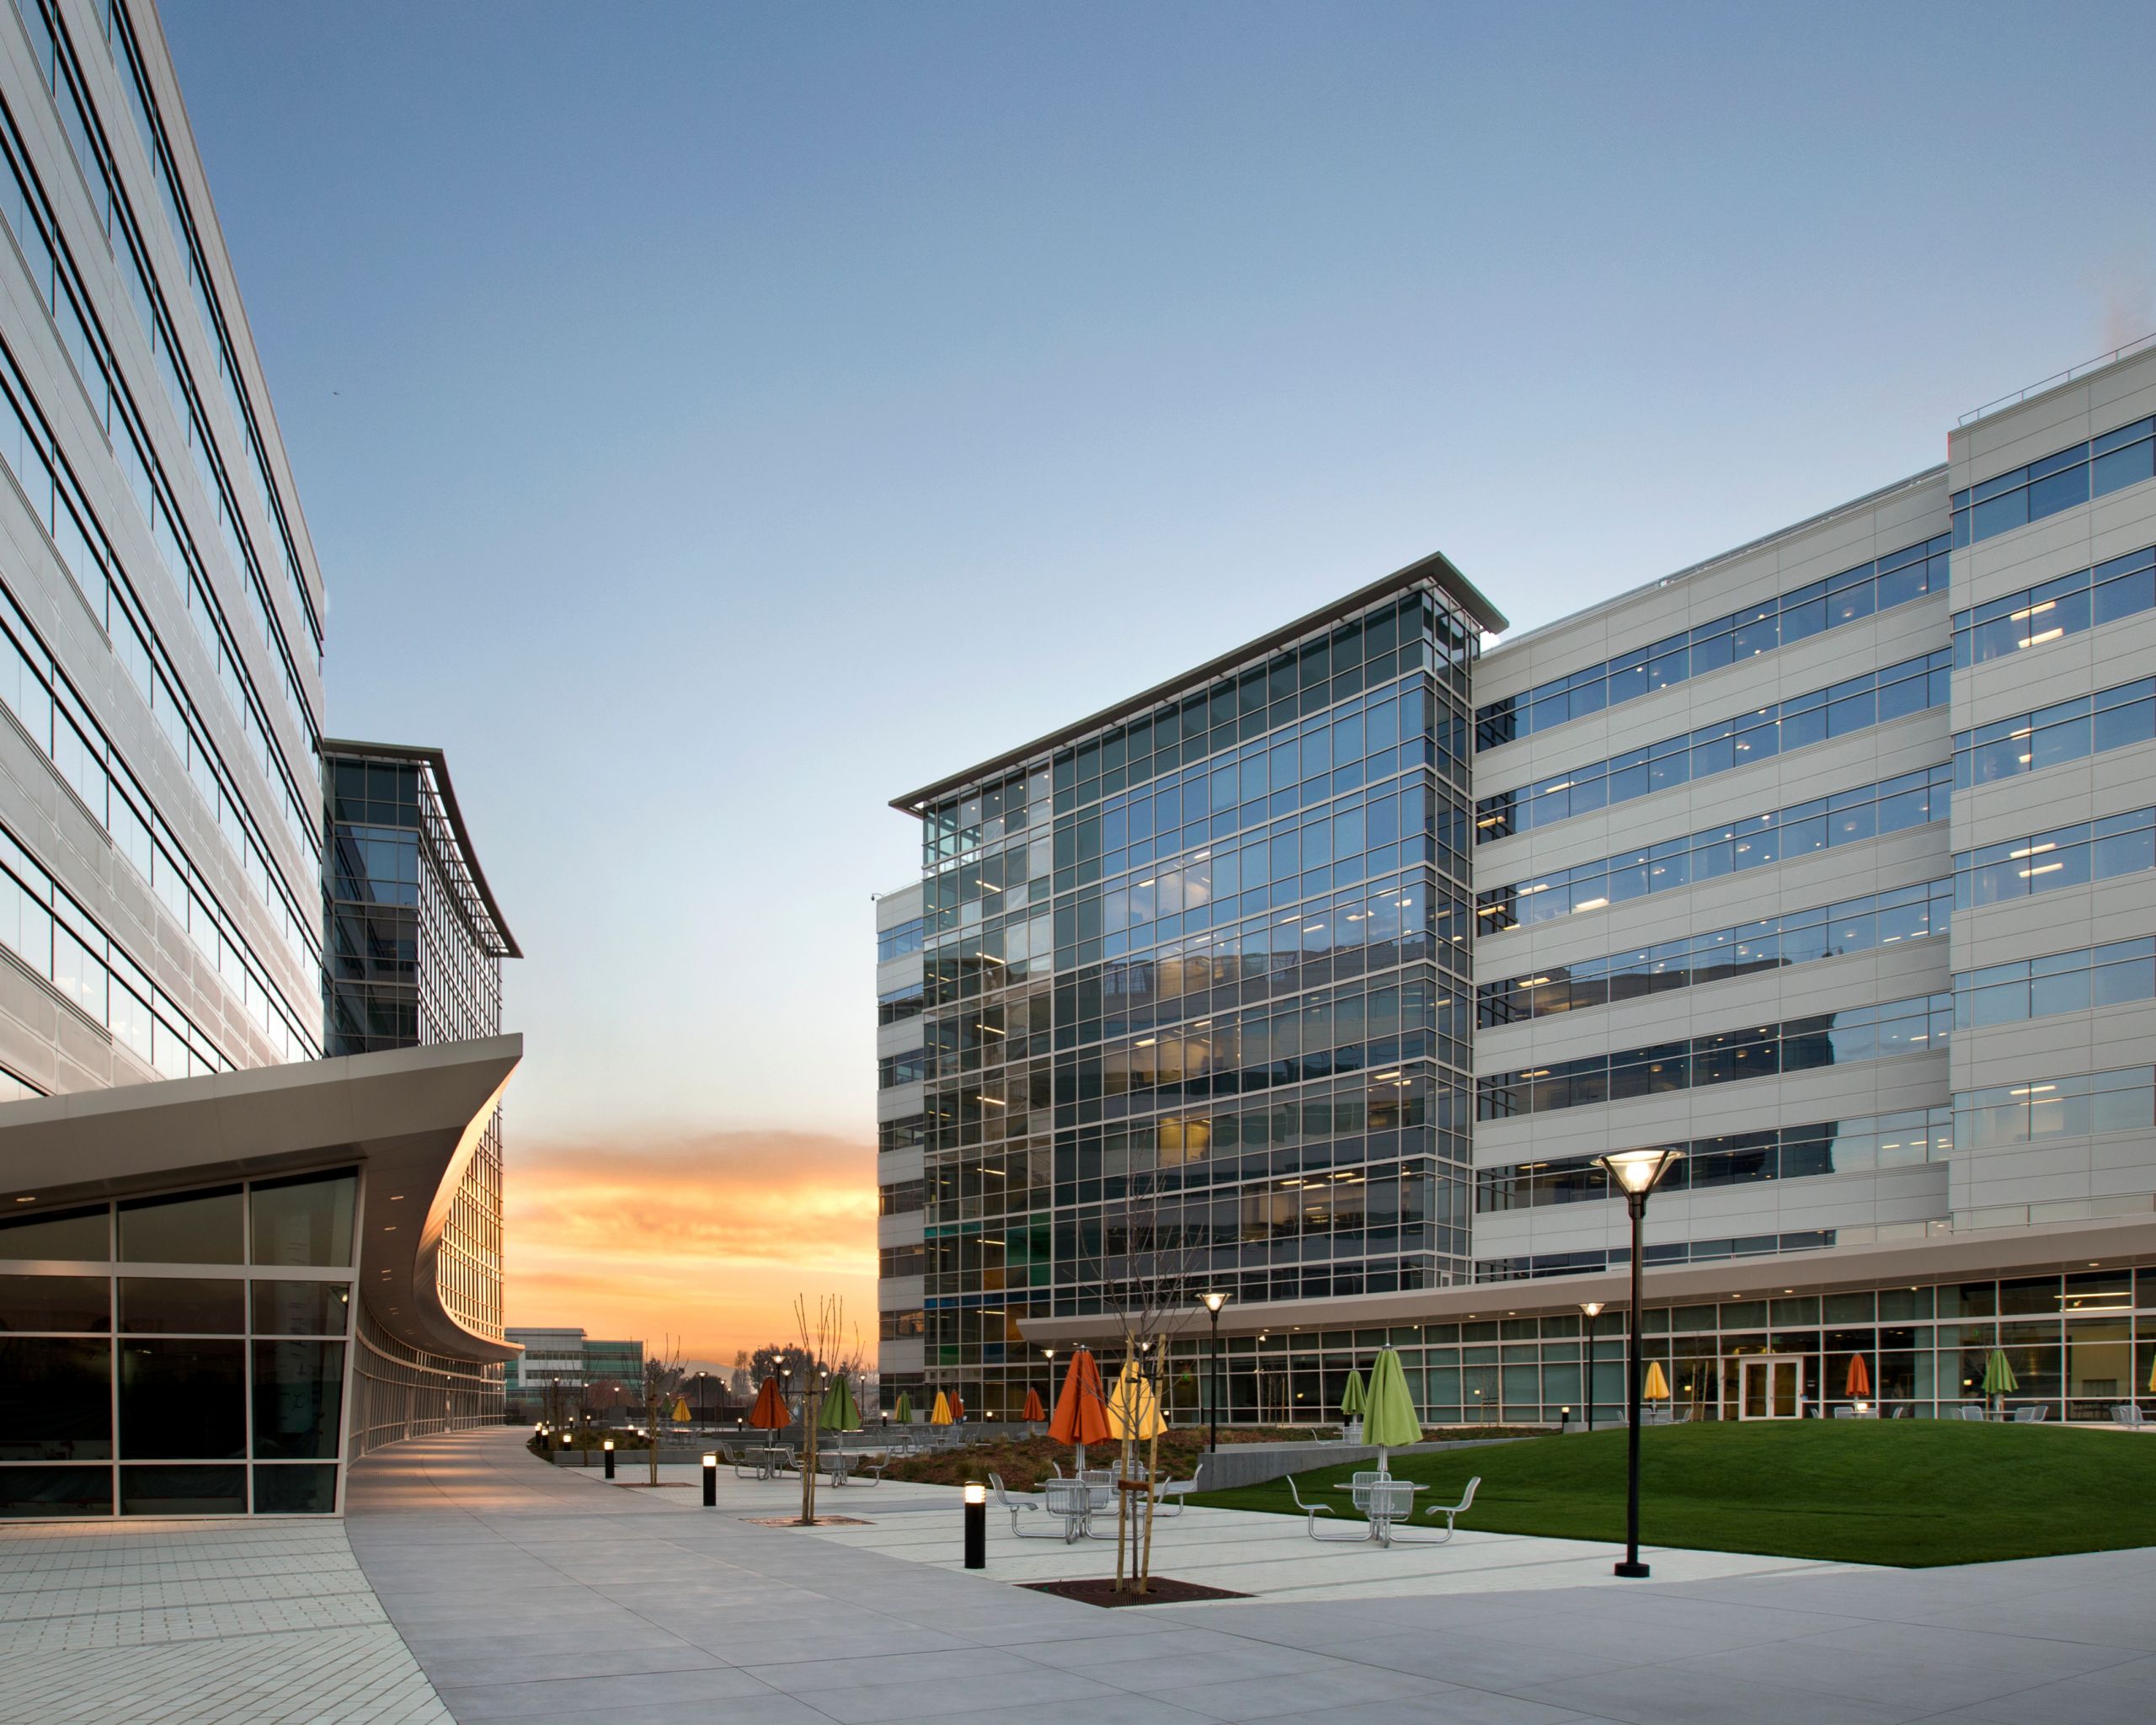 Juniper networks locations sunnyvale adventist health pdx